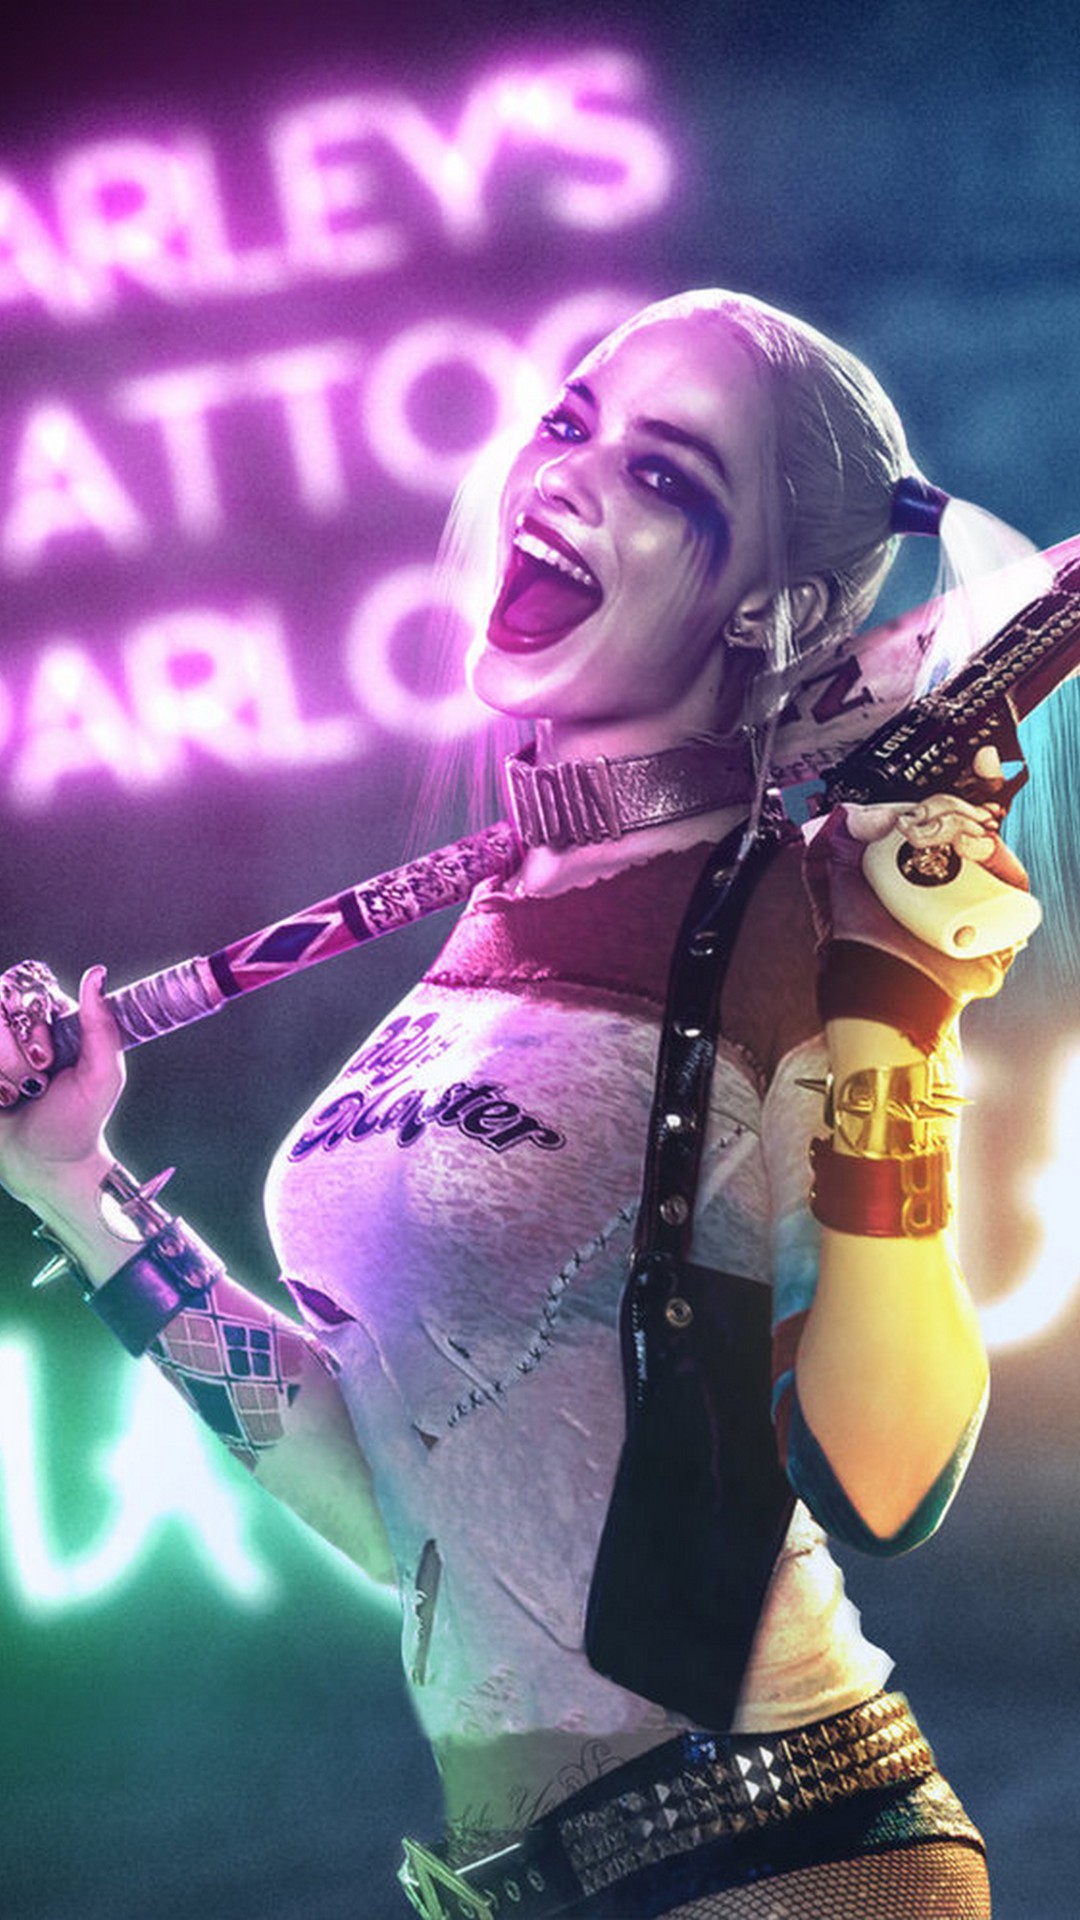 Harley Quinn Movie Wallpaper iPhone with image resolution 1080x1920 pixel. You can make this wallpaper for your iPhone 5, 6, 7, 8, X backgrounds, Mobile Screensaver, or iPad Lock Screen